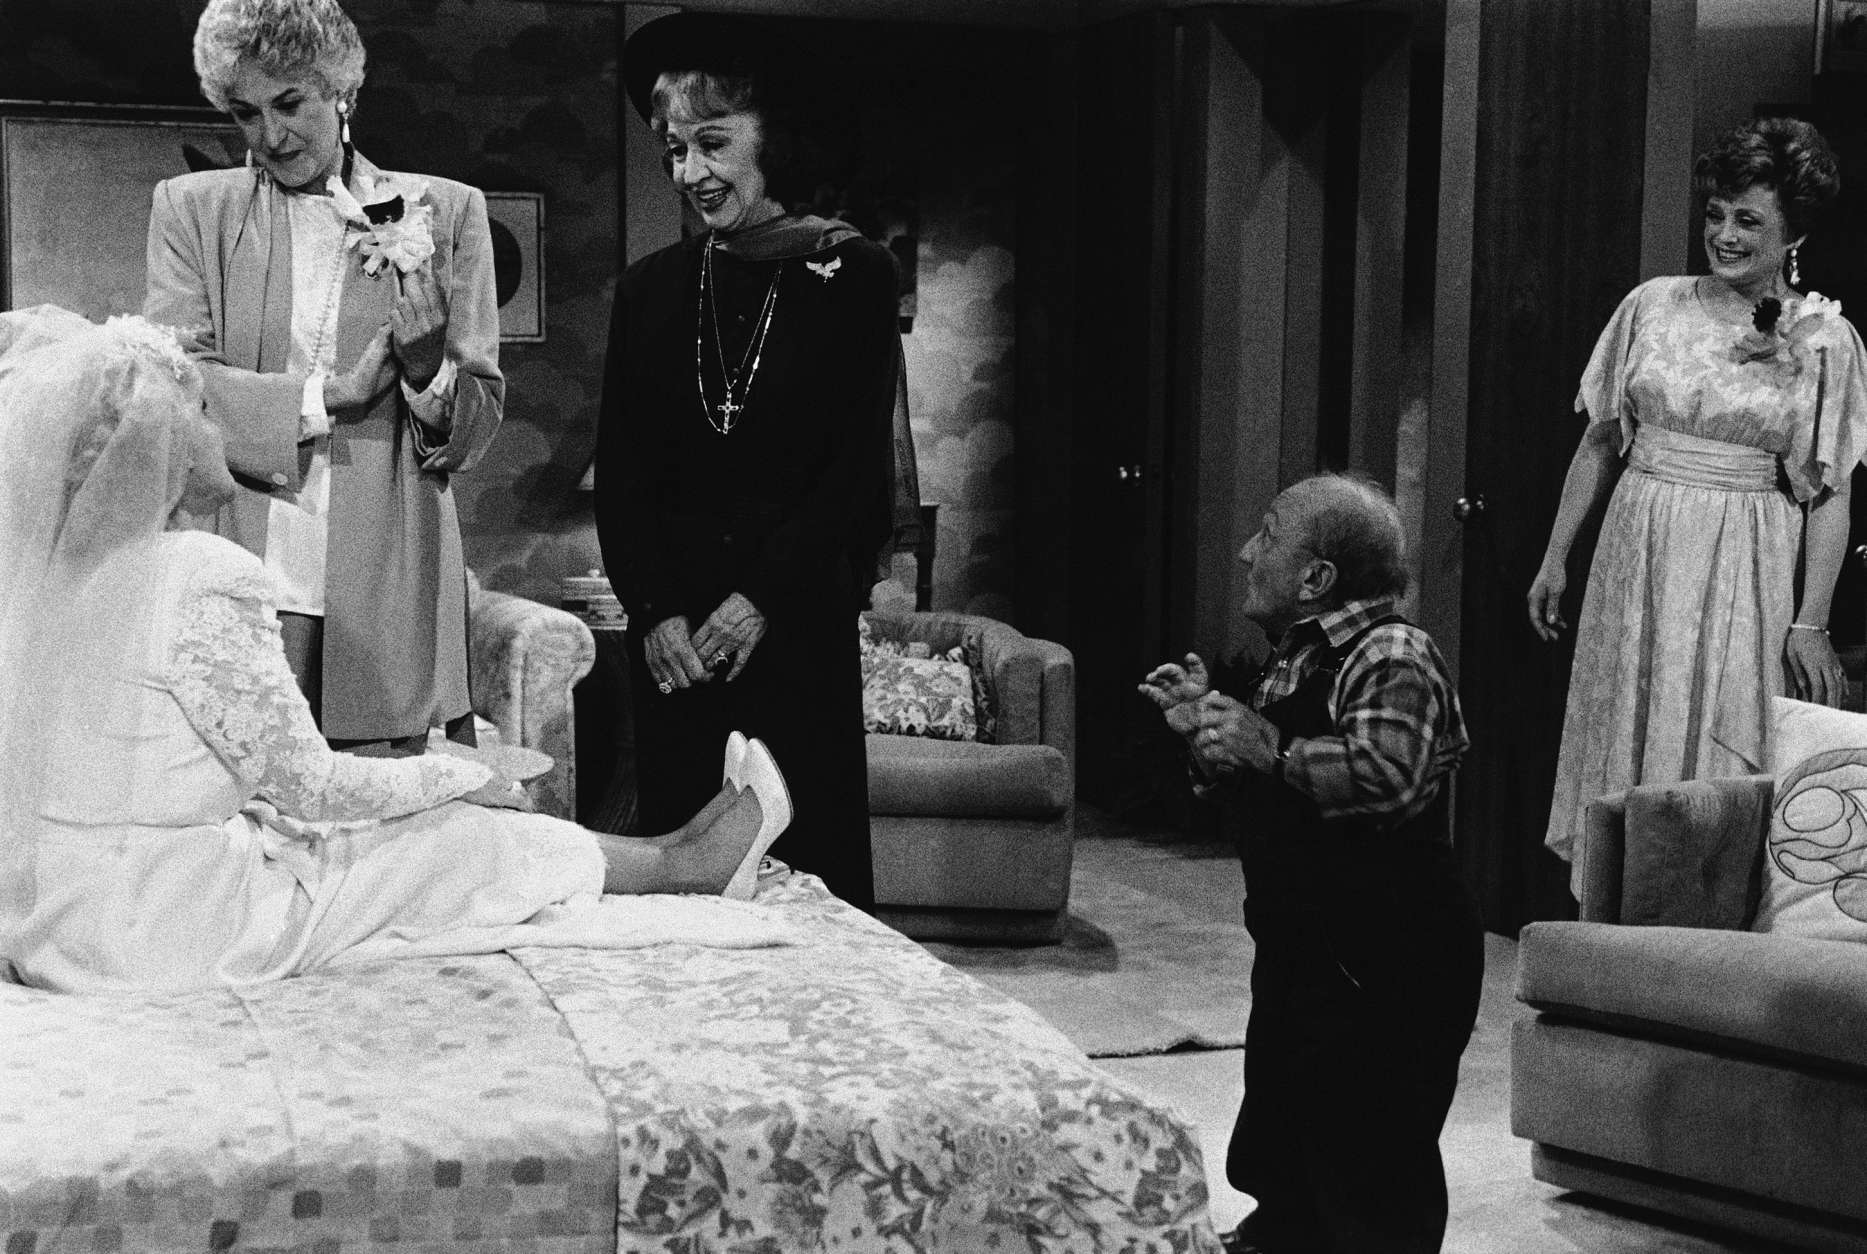 Astrologer Jeane Dixon plays herself of an upcoming episode of ?The Golden Girls? on NBC on Saturday, Dec. 14, 1985. Pictured during the taping of the show, in which she appears during a dream sequence, are: (left to right)- Betty White (Rose Nylund); Bea Arthur (Dorothy Zbornak); Dixon; Billy Barty (Hollywood?s most famous midget, who is playing Rose?s father in her dream) and Rue McClanahn (Blanche DuBois). (AP Photo)